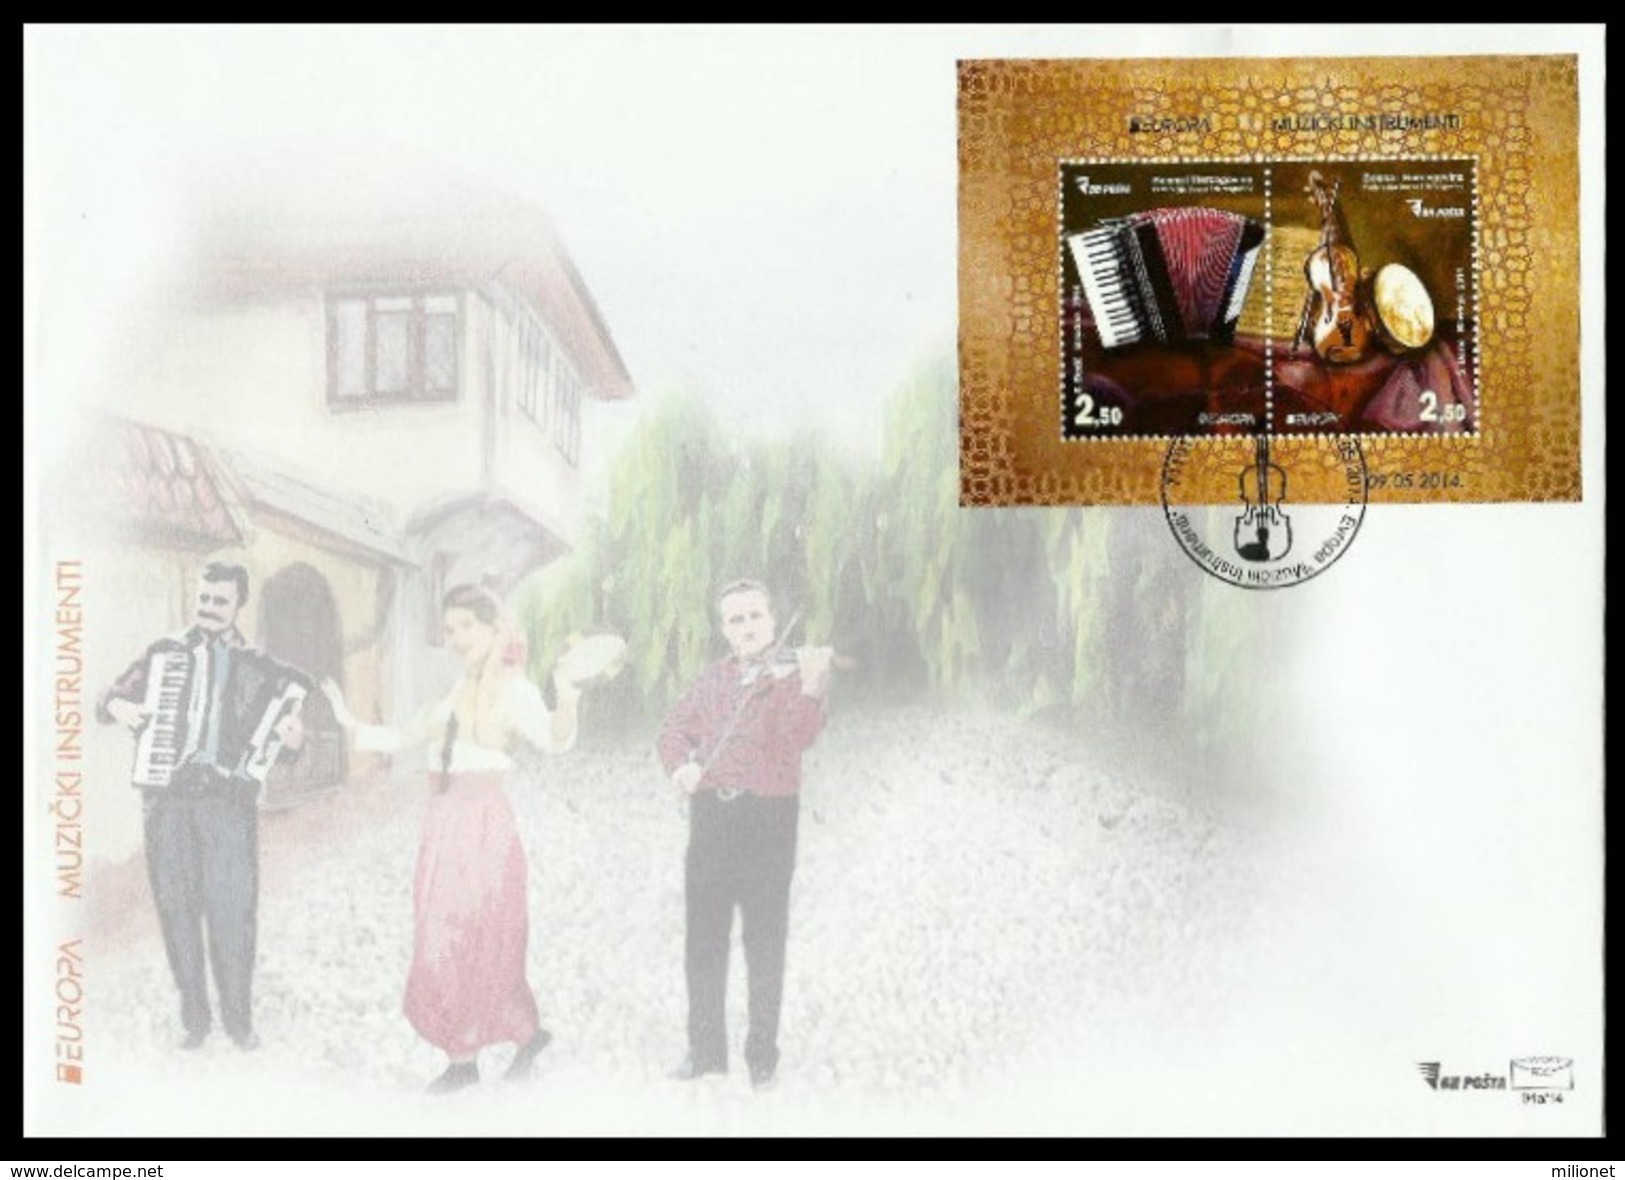 SALE!!! BOSNIA HERZEGOVINA SARAJEVO 2014 EUROPA CEPT MUSIC INSTRUMENTS - FDC First Day Cover Of The S/S - 2014